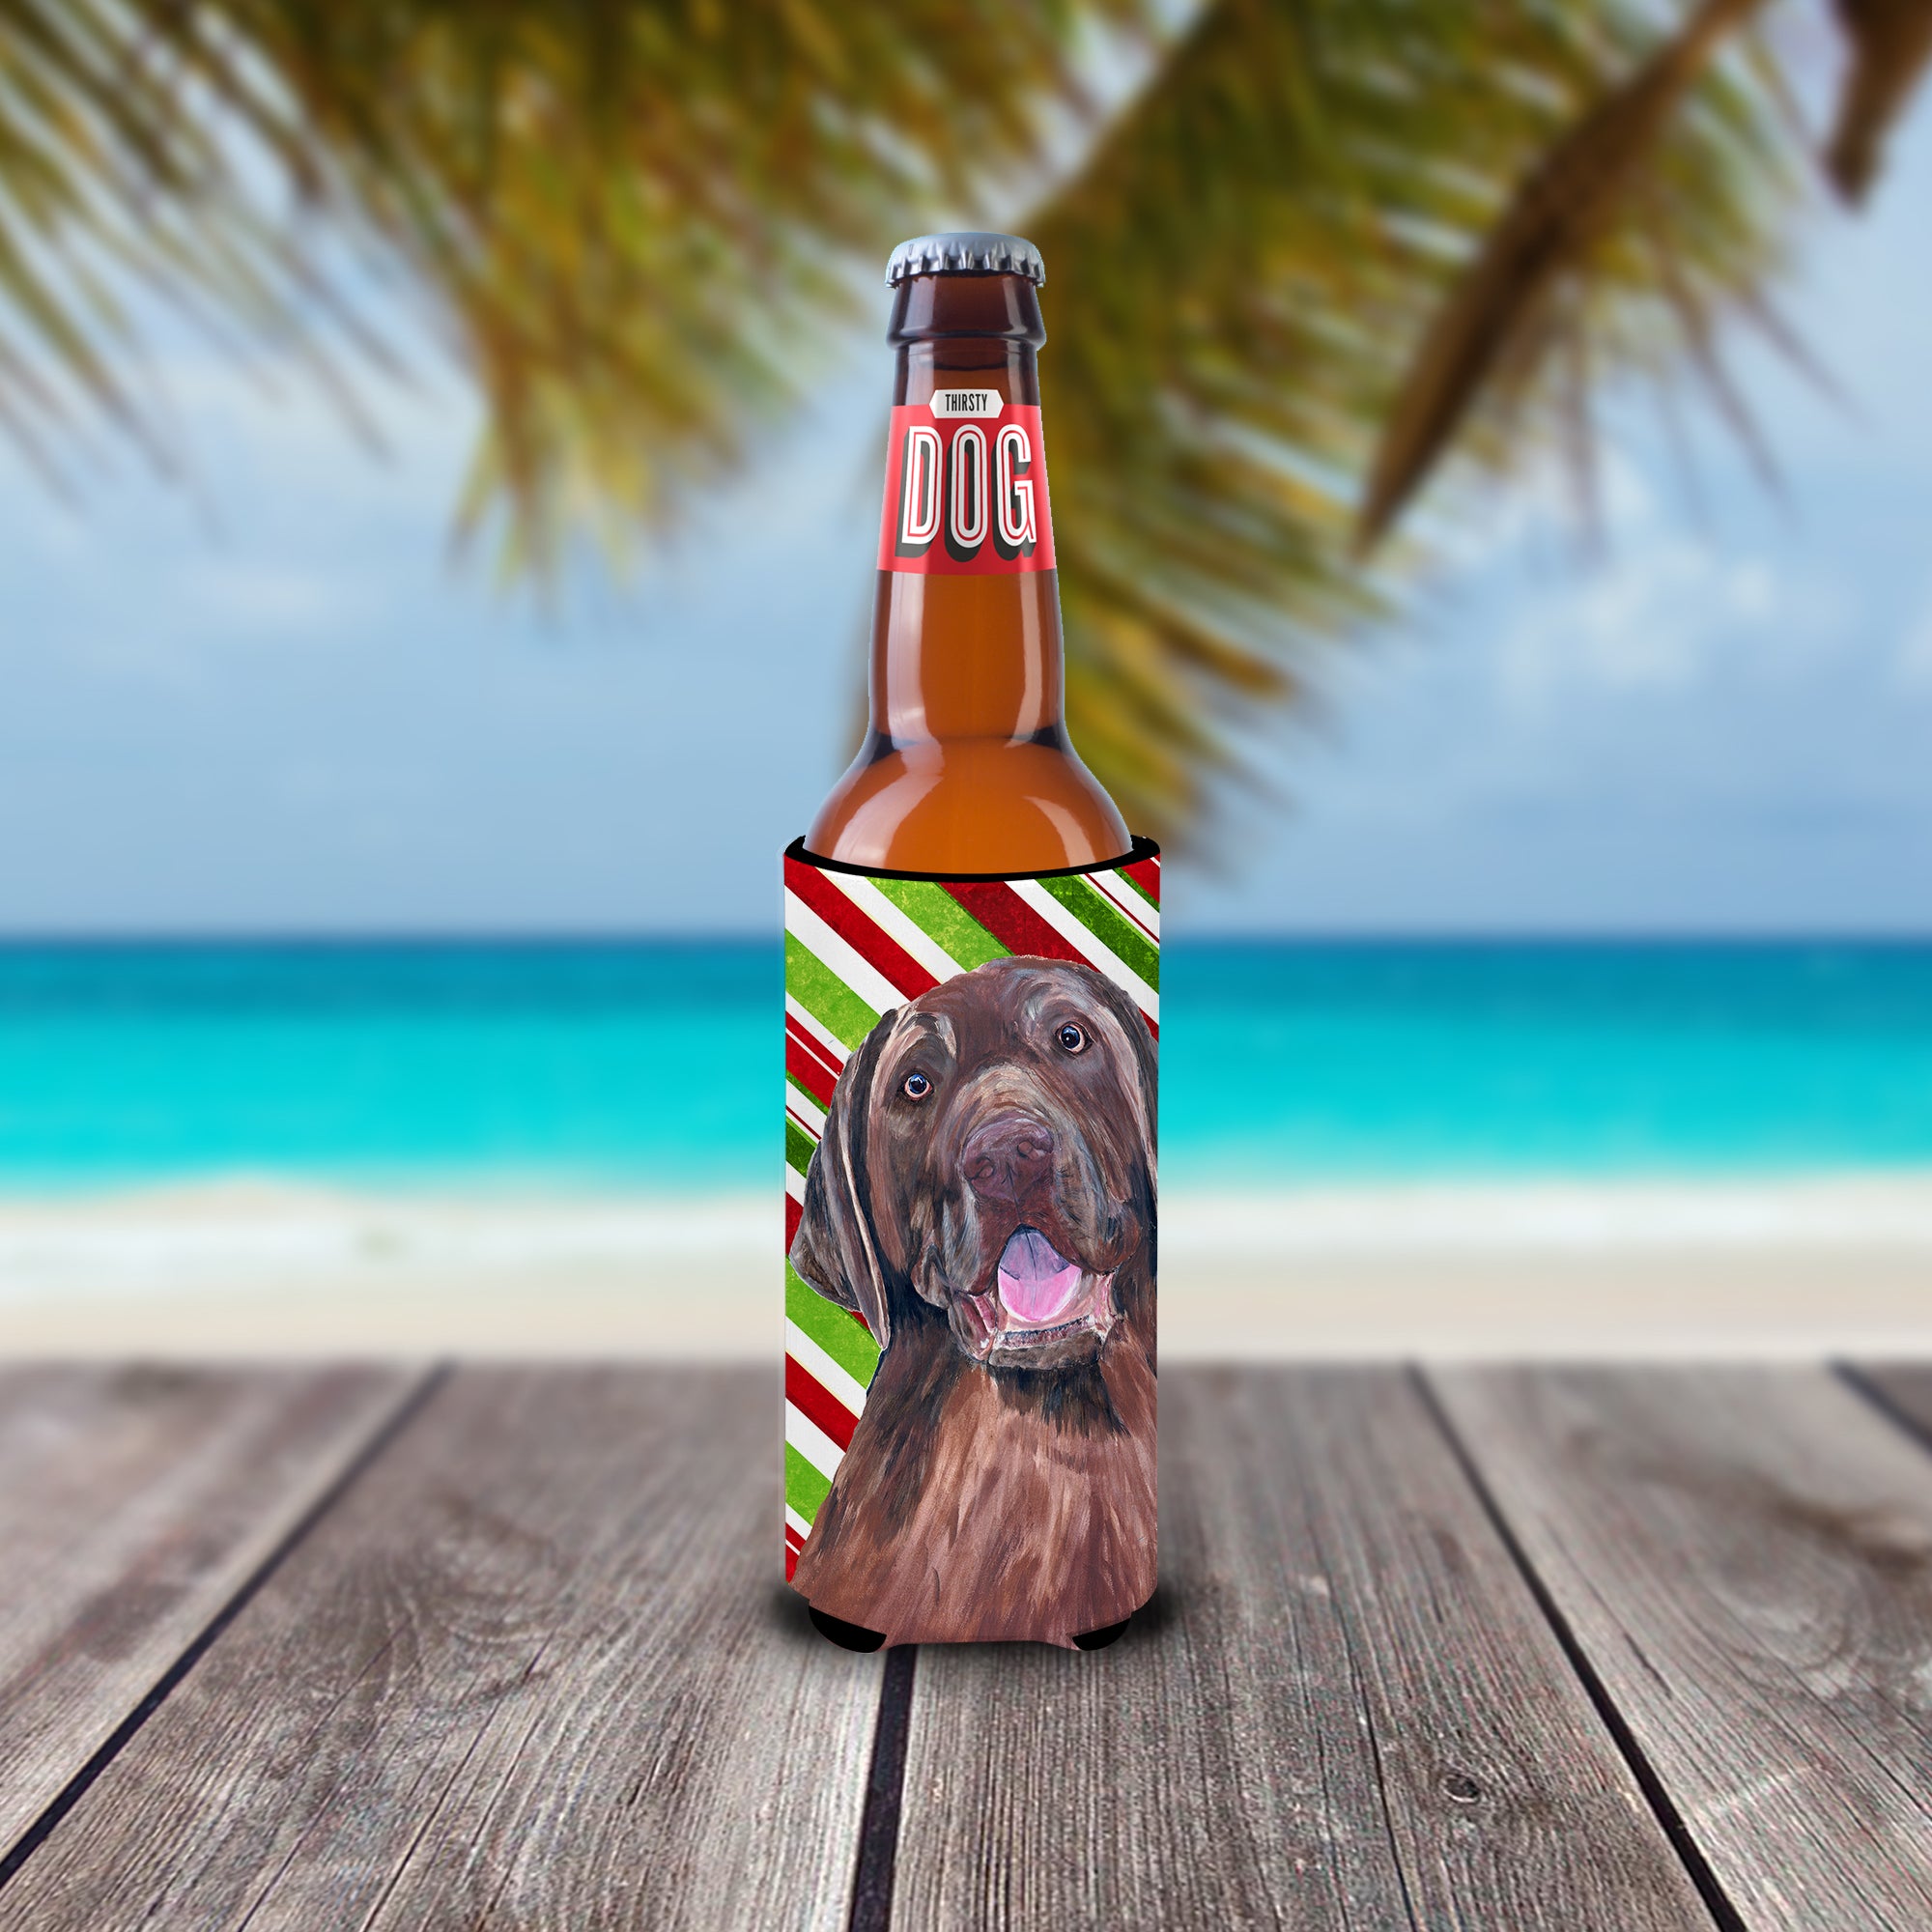 Labrador Candy Cane Holiday Christmas Ultra Beverage Insulators for slim cans SC9344MUK.